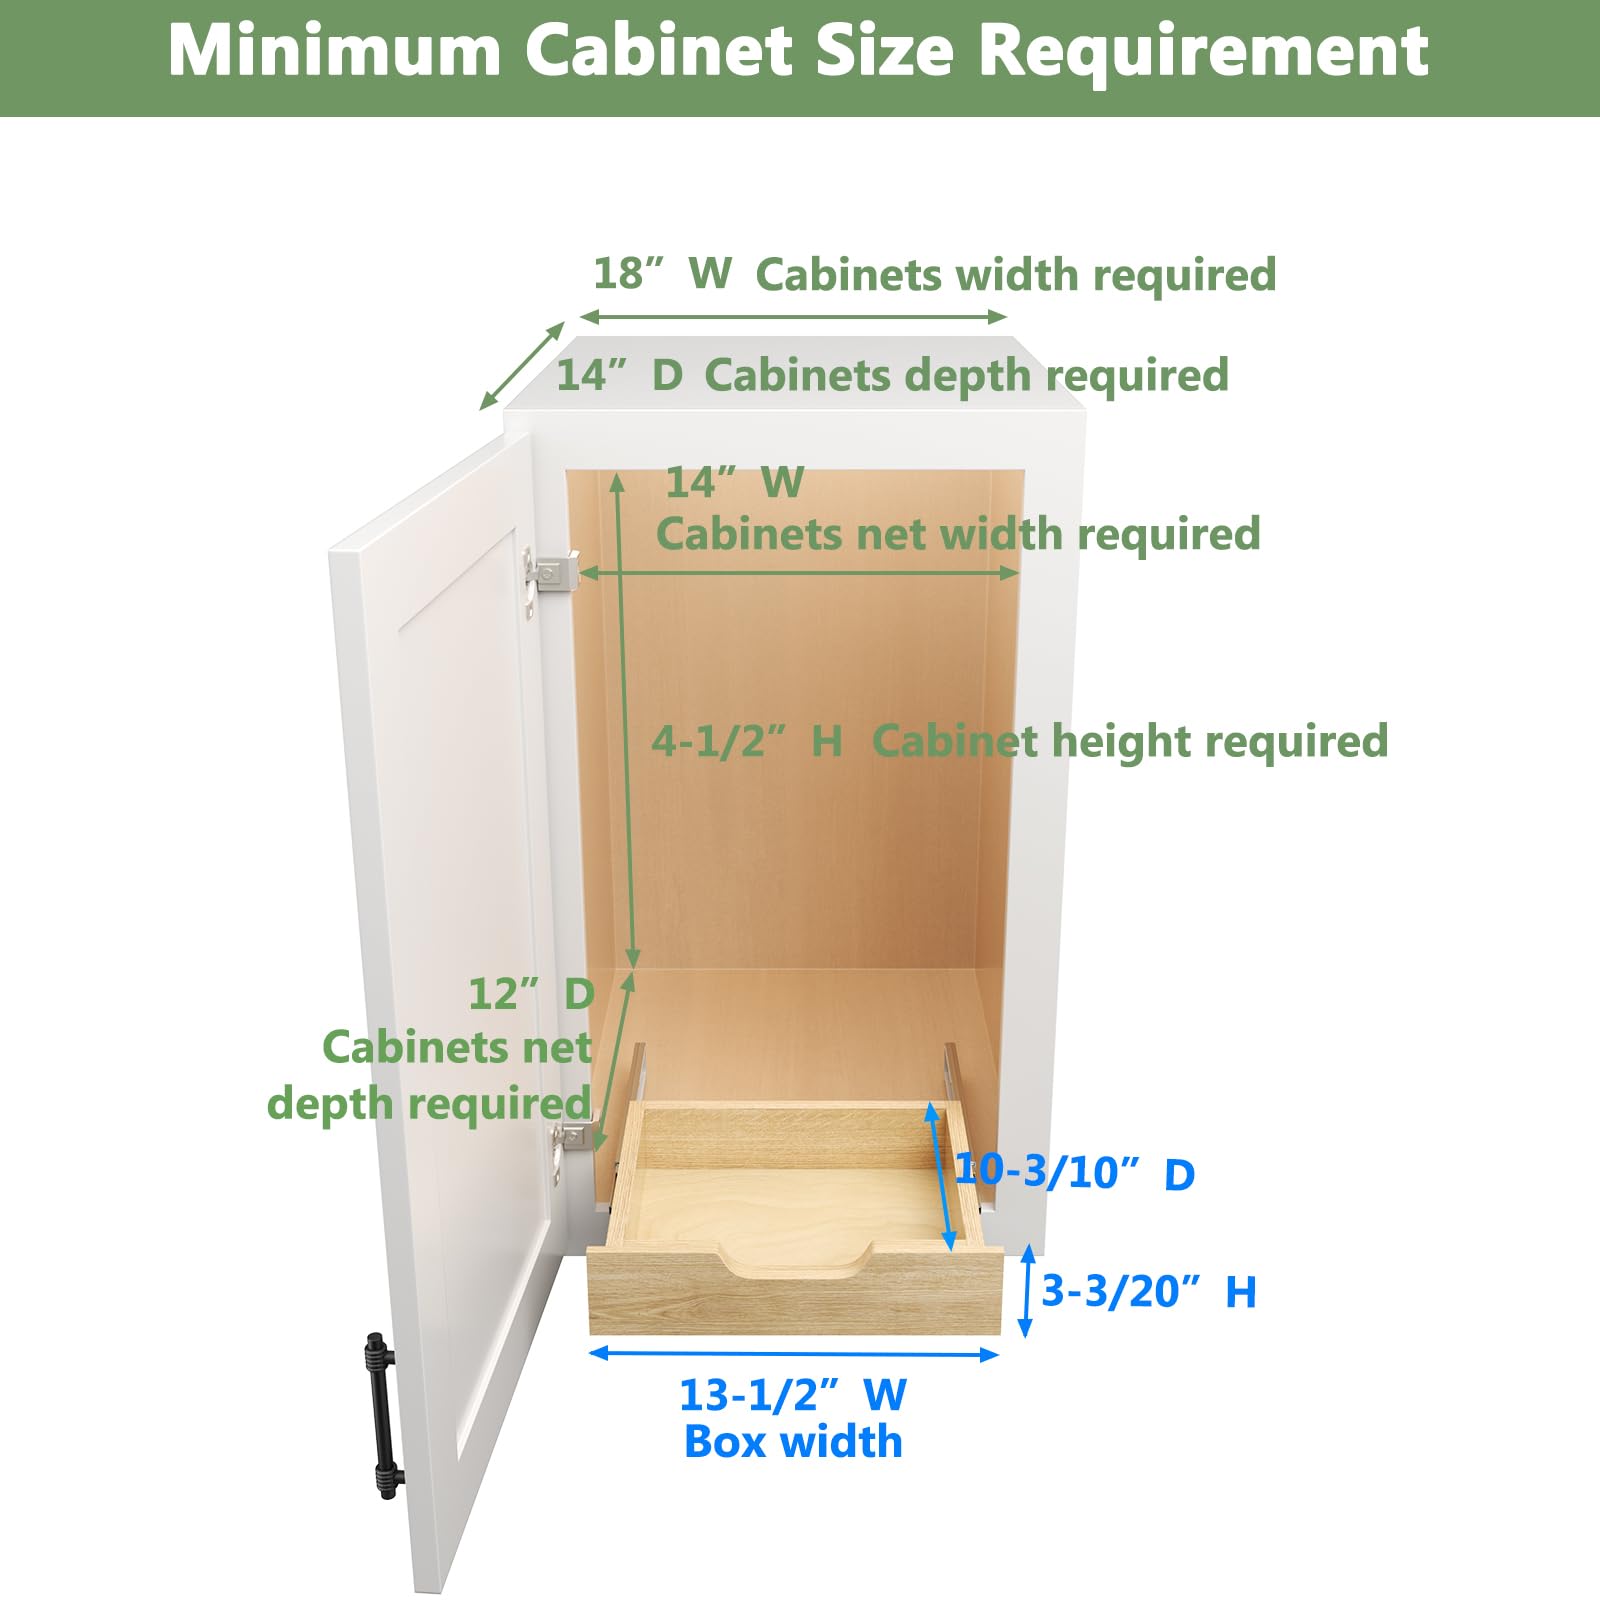 LOVMOR Soft Close Wood Pull Out Cabinet Organizer 13½” W x 10 ³/₁₀” D, Slide Out Cabinet Organizer with Full Extension Rail Slides Pull Out Drawer for Wall Cabinets and Pantry…